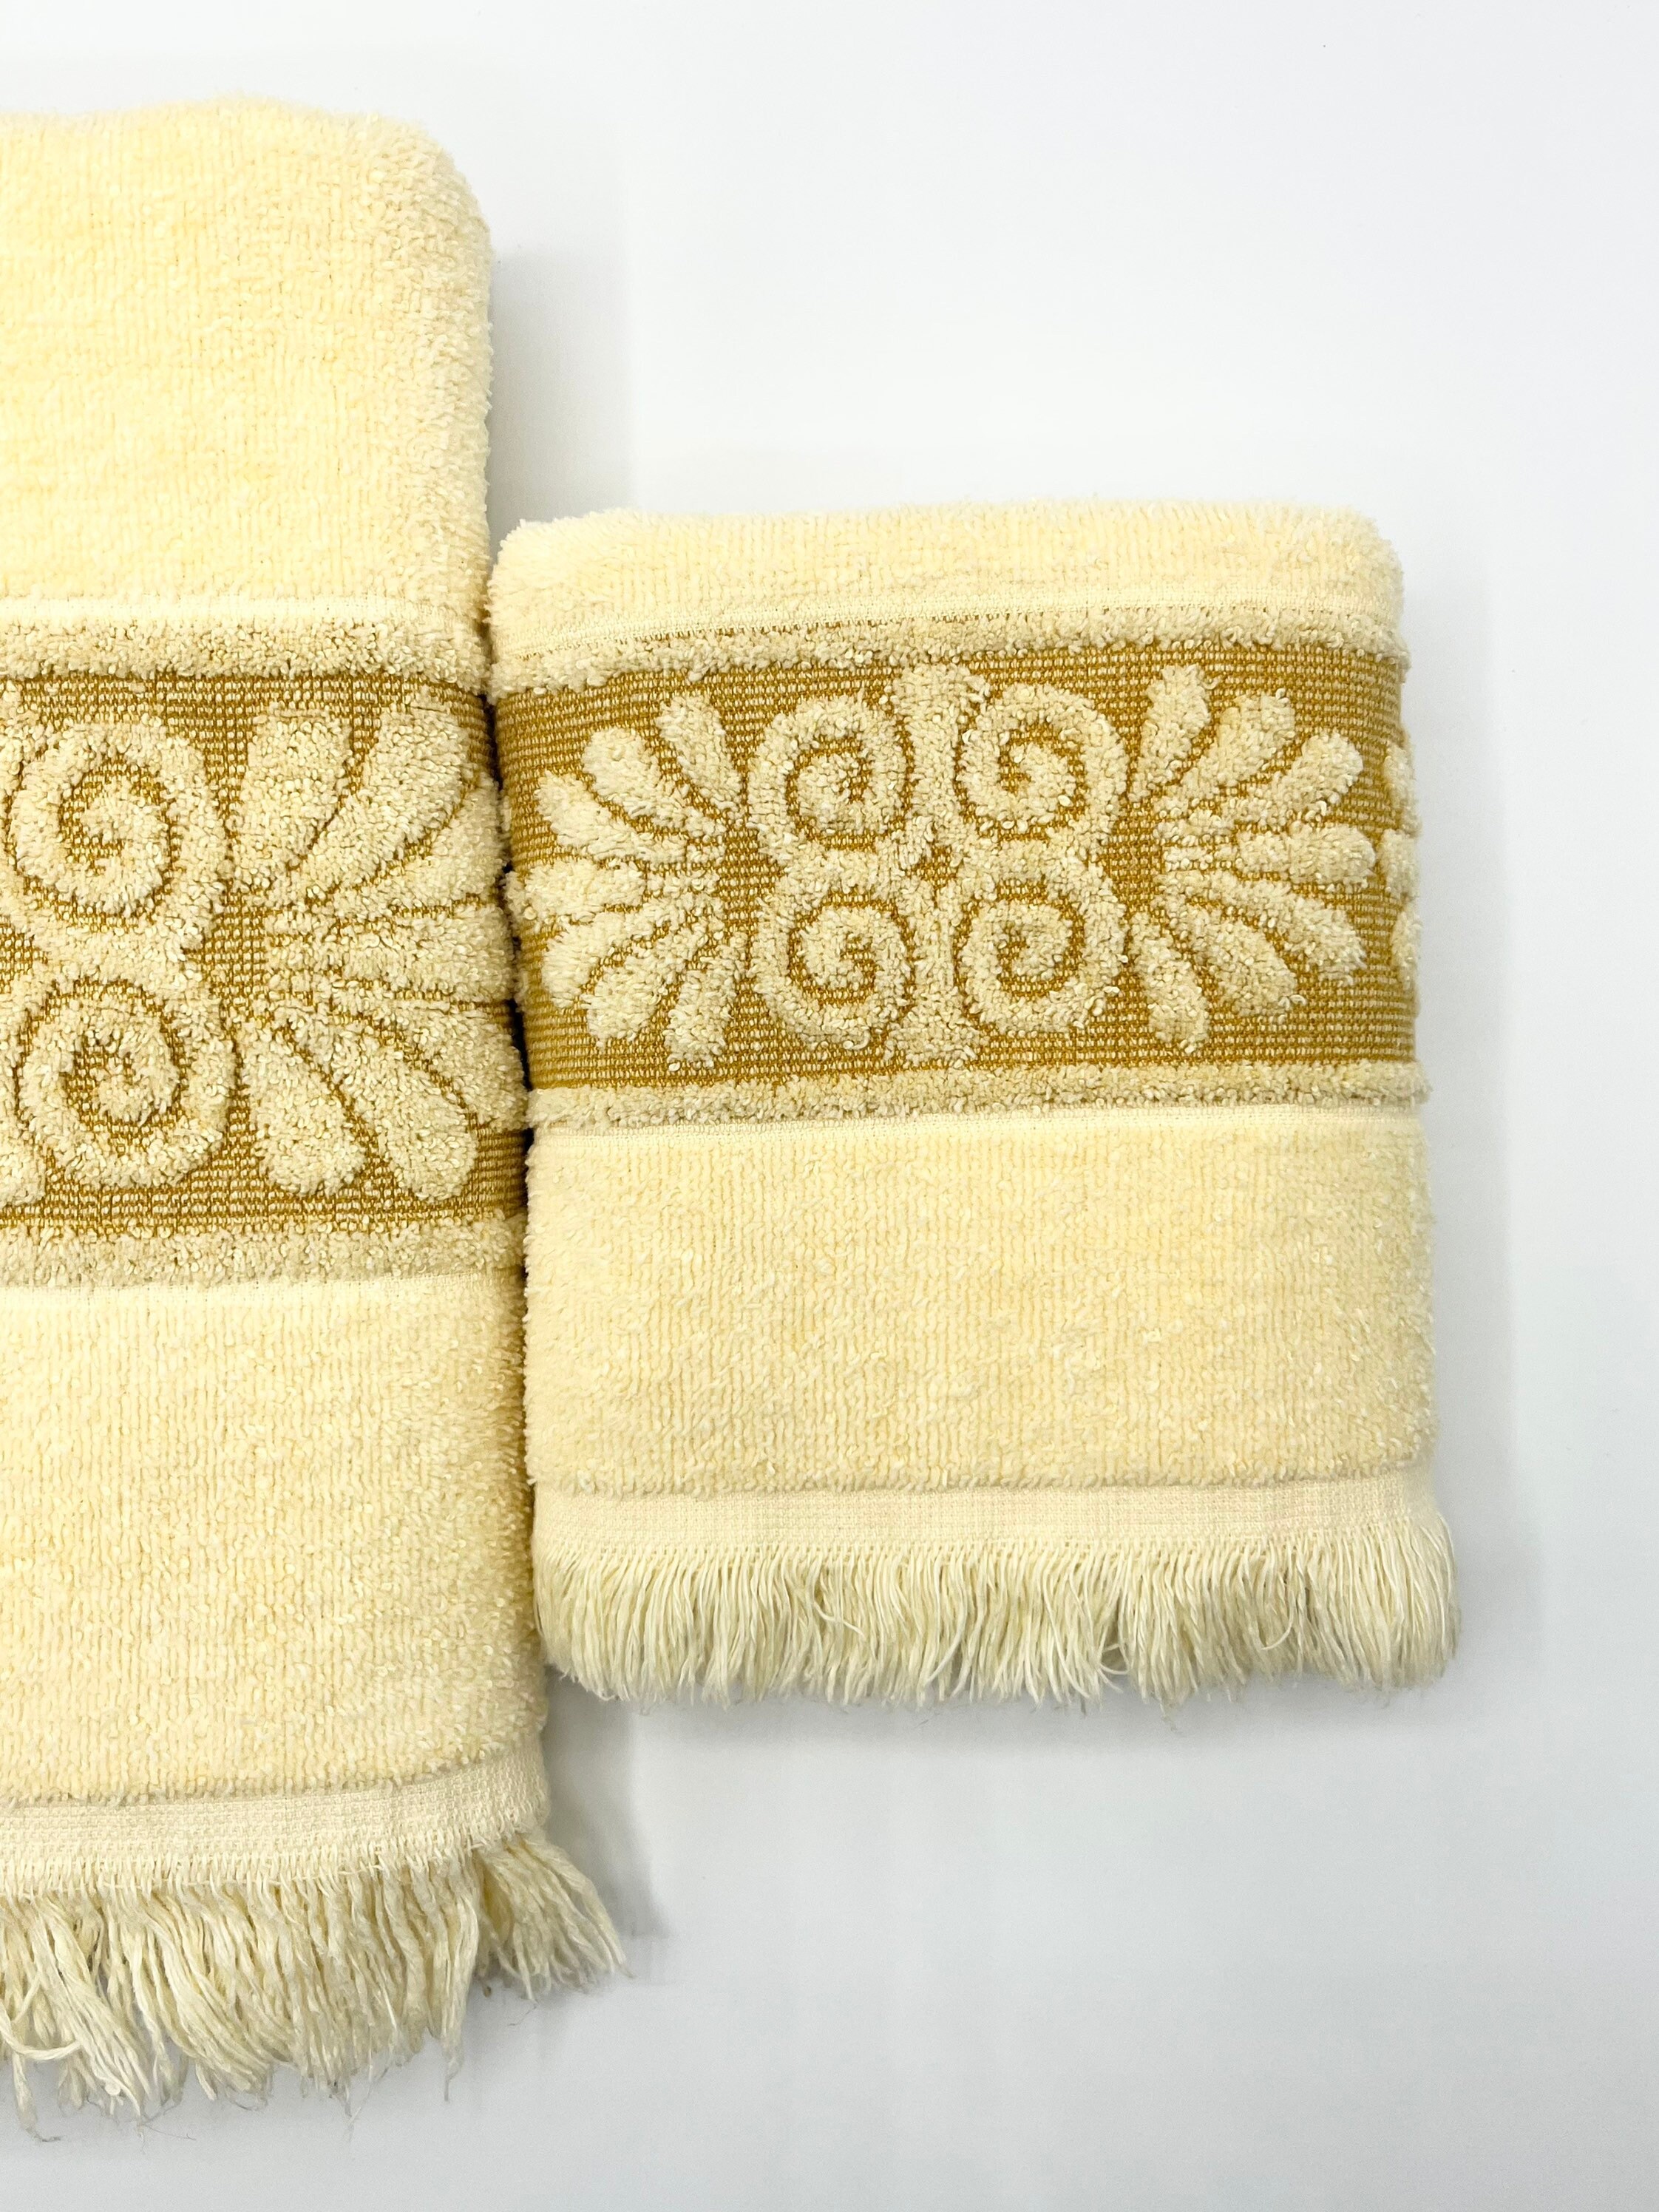 Cannon Bath and Hand Towel Butter Yellow Tan Mid Century -  Sweden